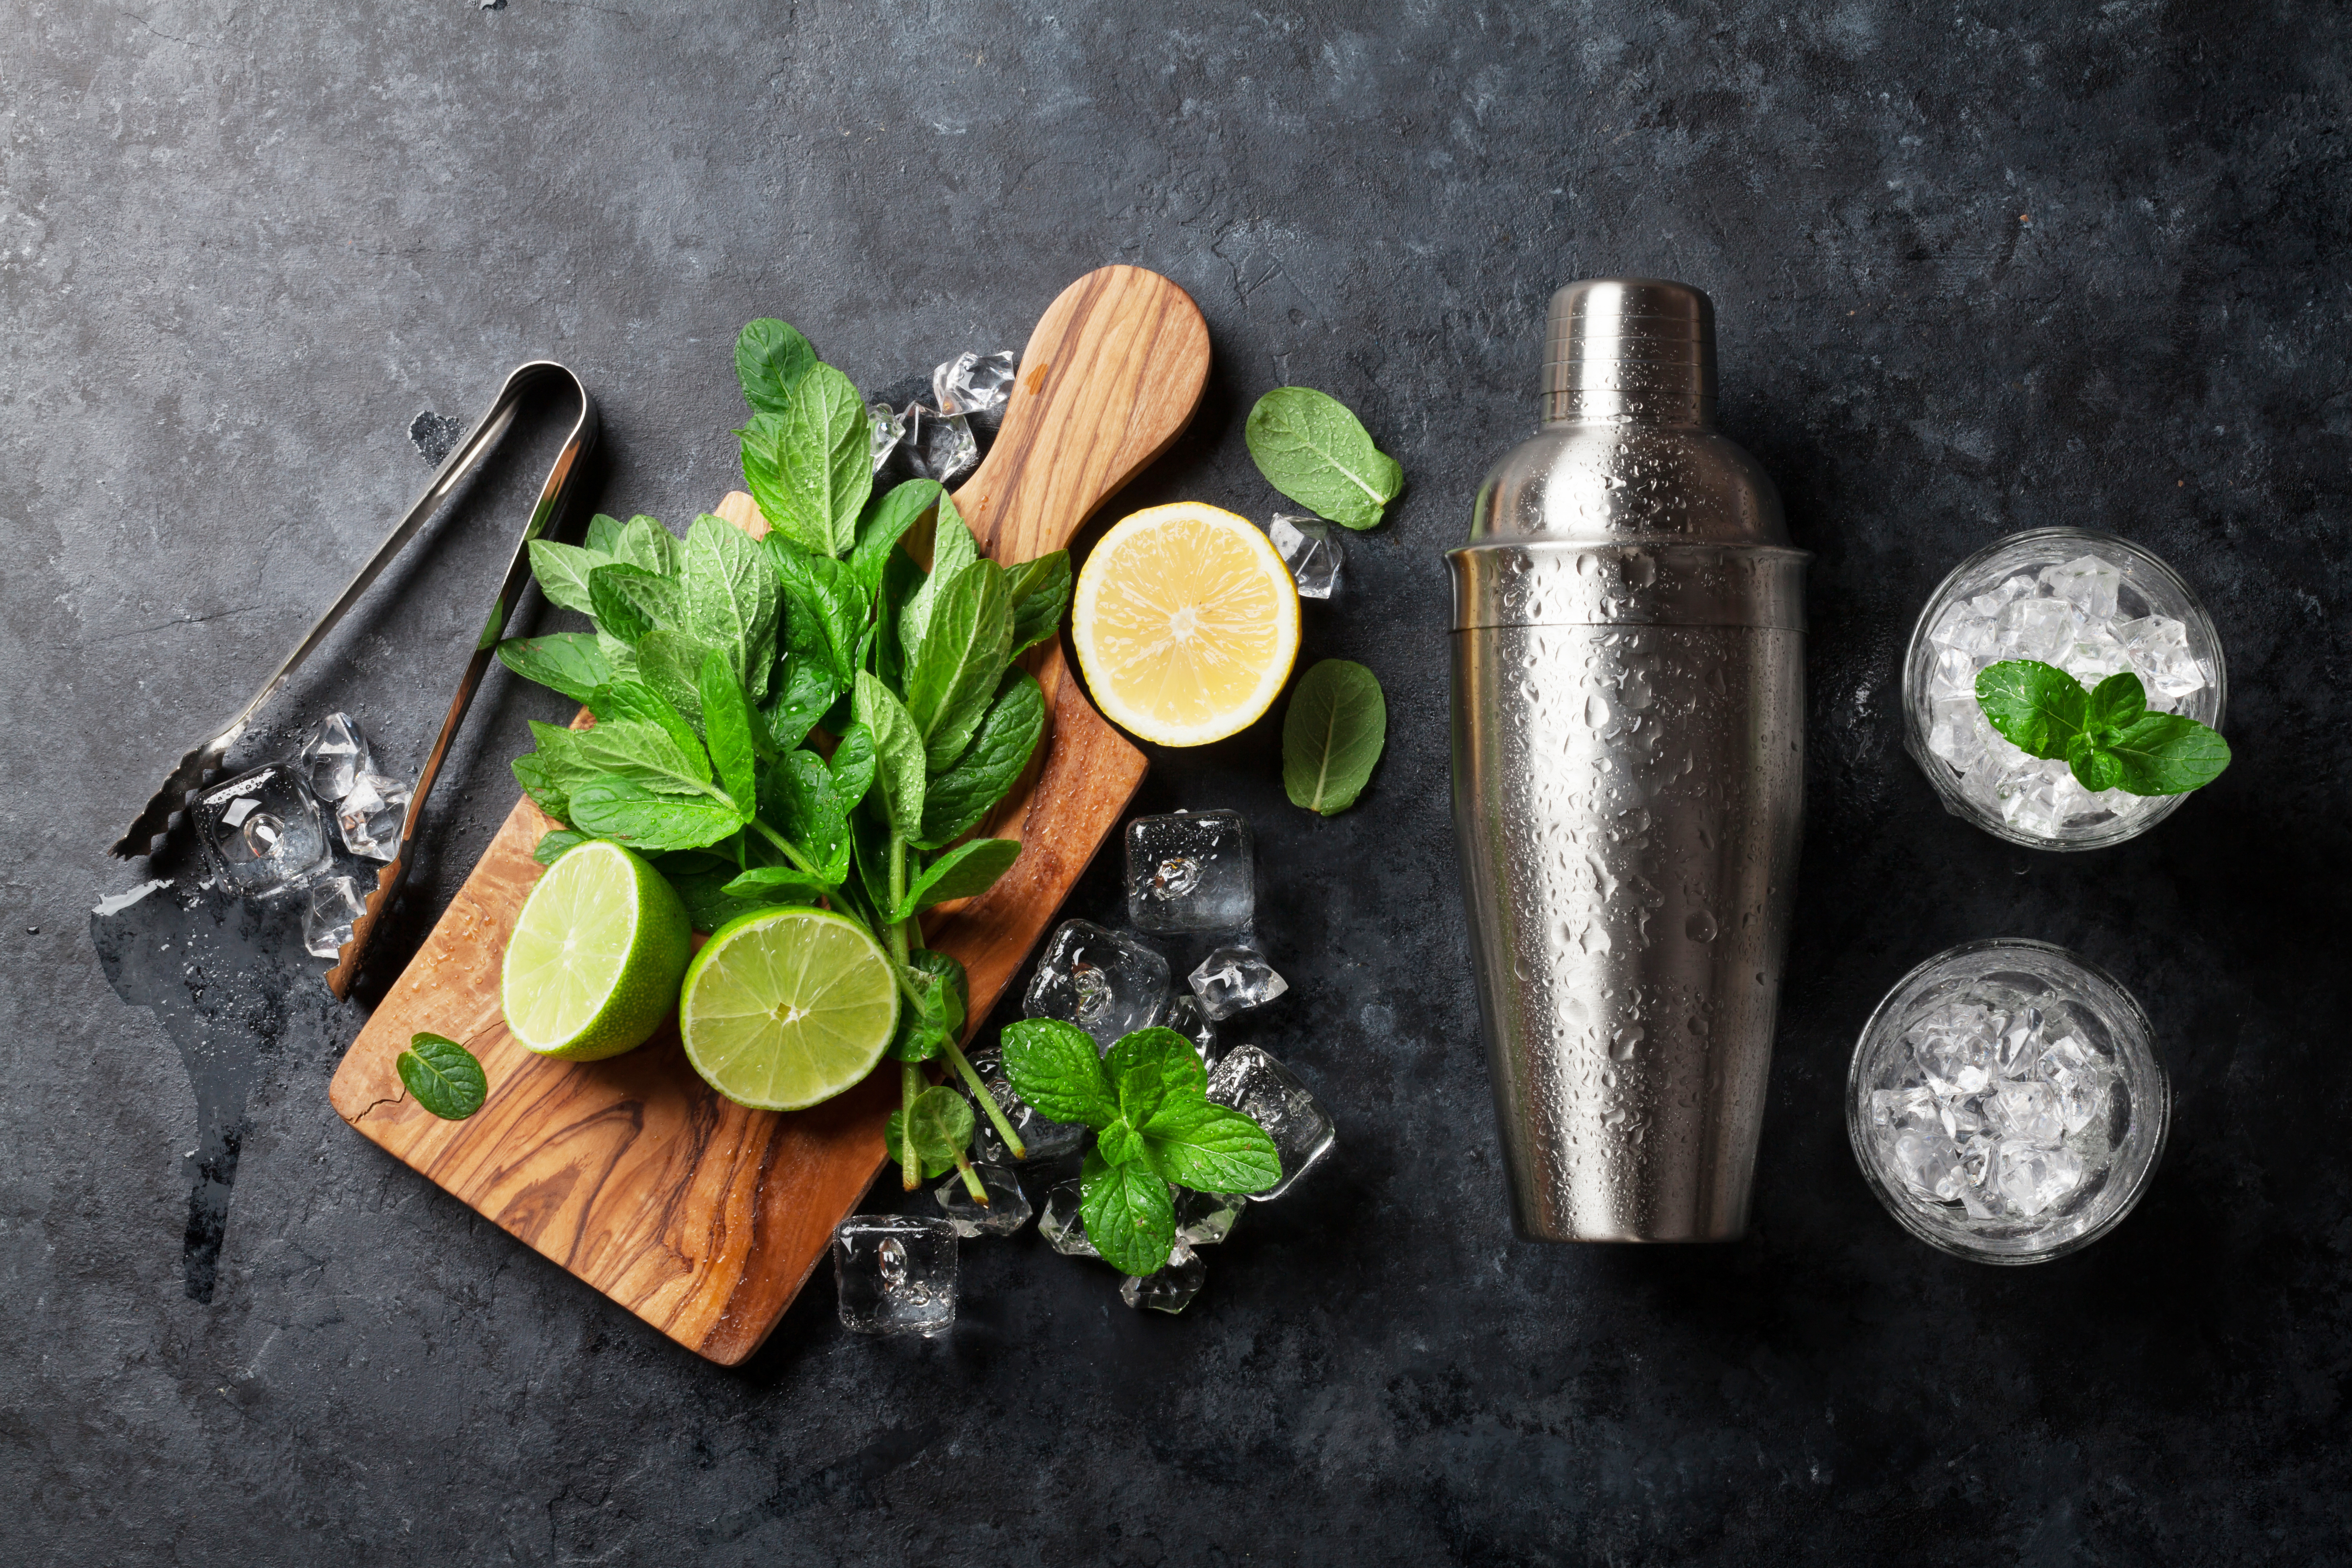 A cocktail shaker and Mojito cocktail ingredients | Source: Shutterstock